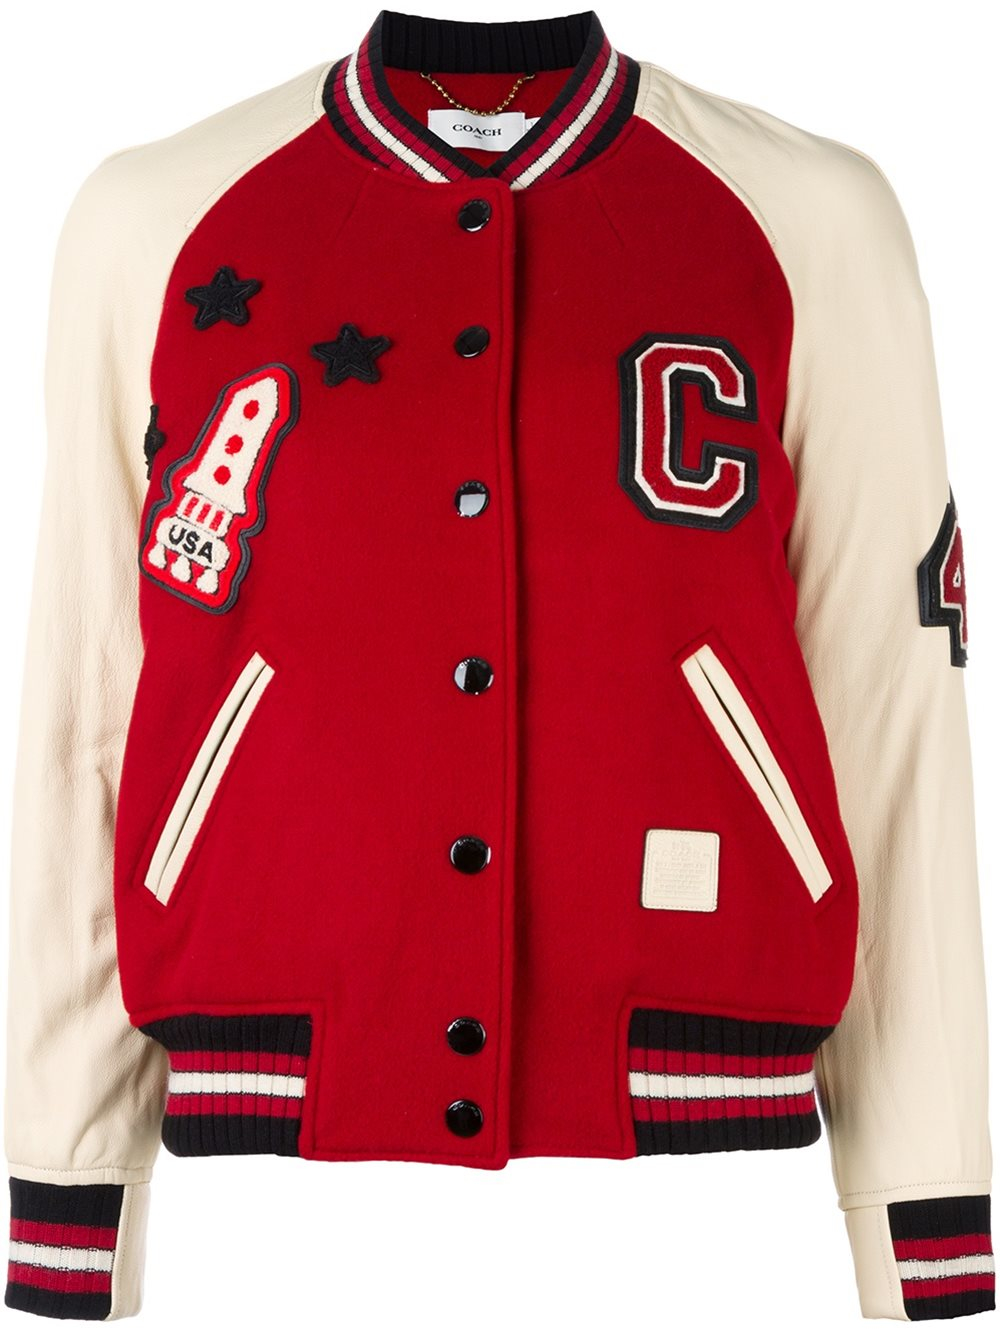 COACH Wool Varsity Bomber Jacket in Red - Lyst